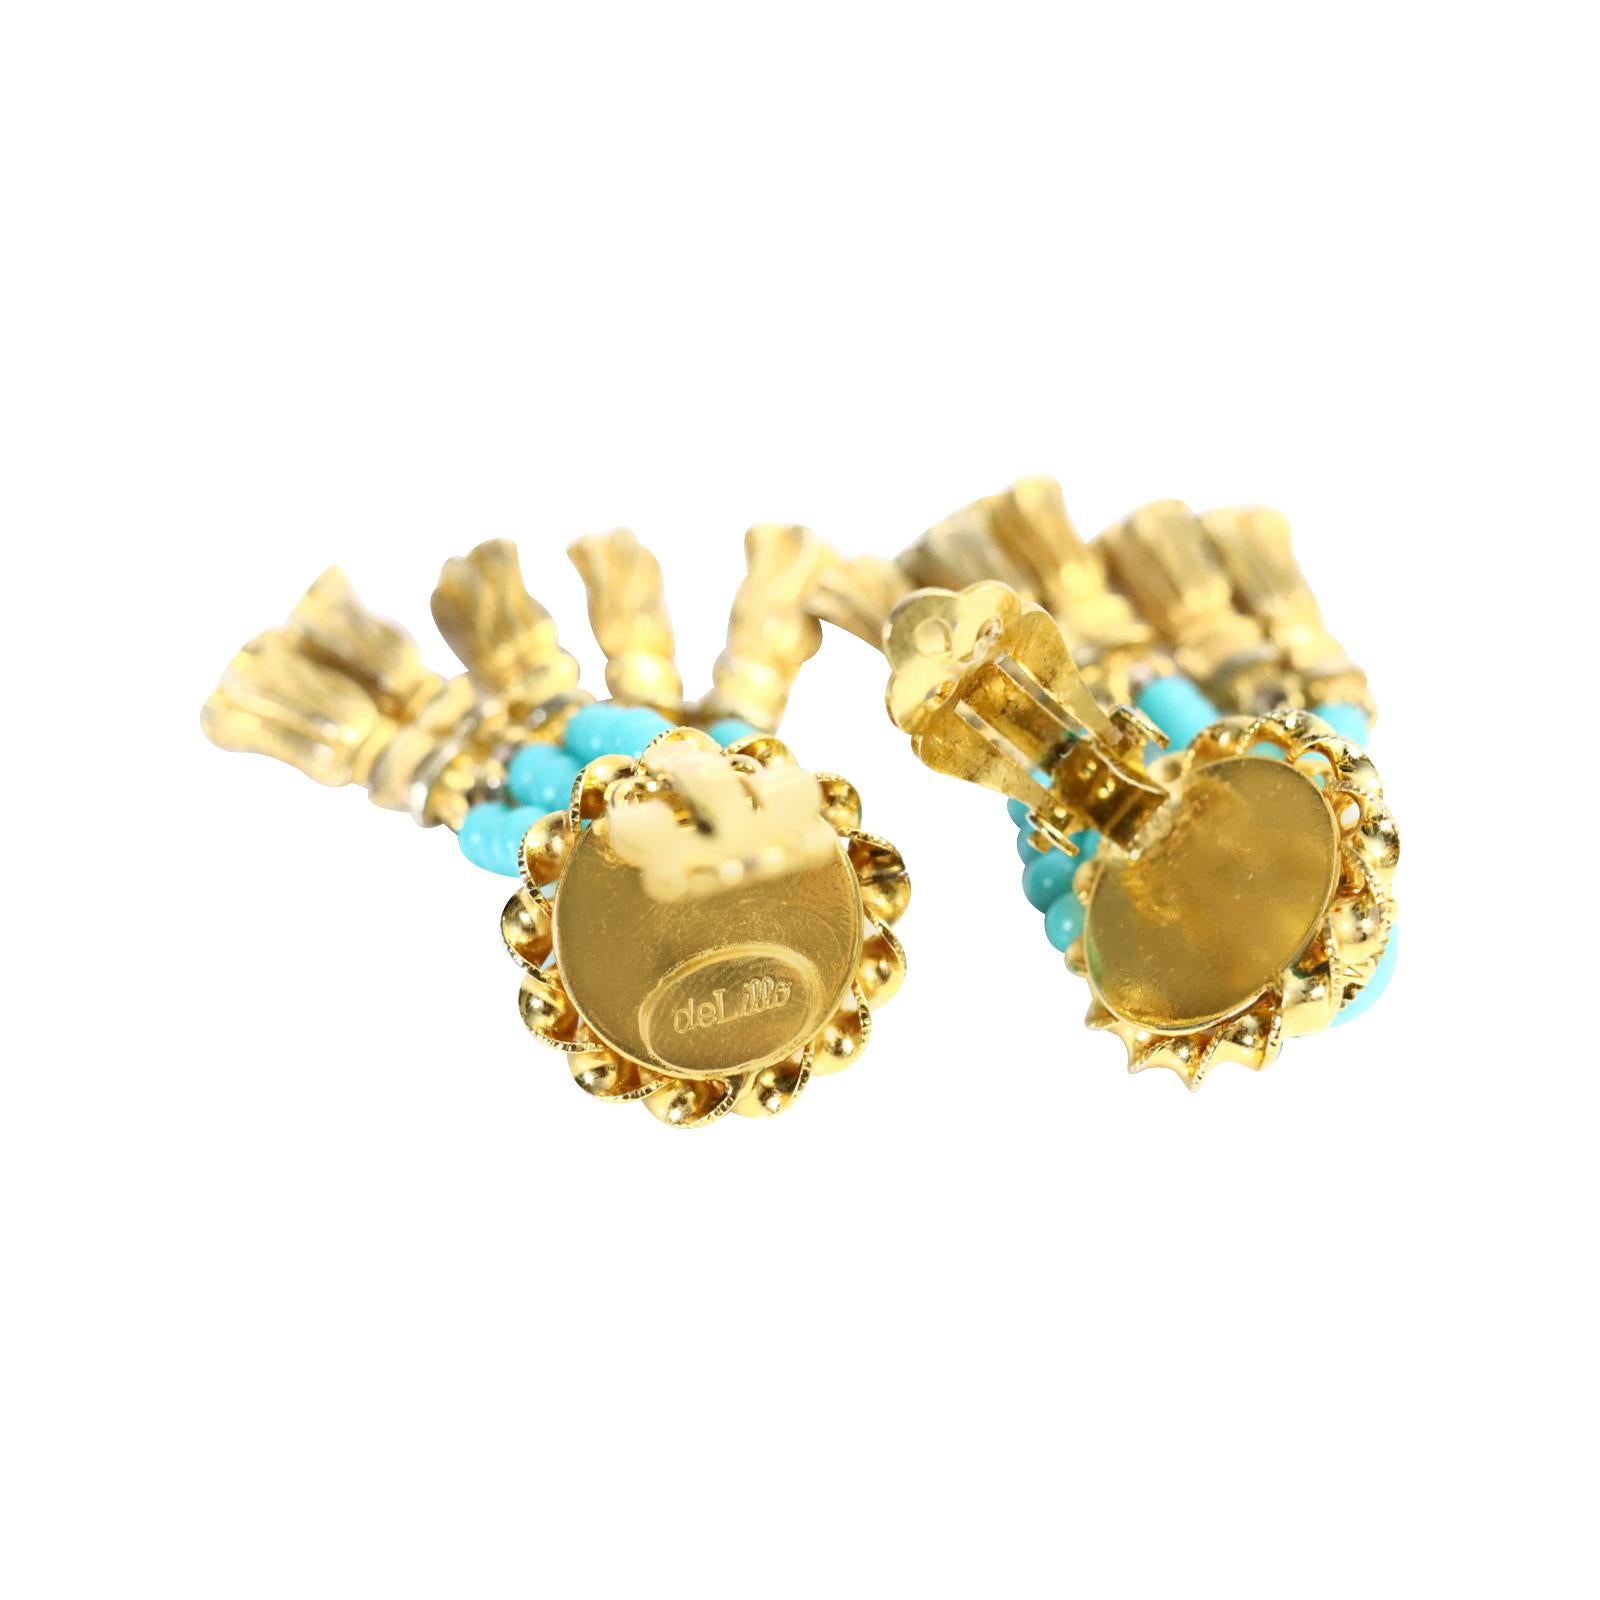 Vintage deLillo Faux Turquoise and Gold Tone Dangling Earrings Circa 1970s For Sale 4